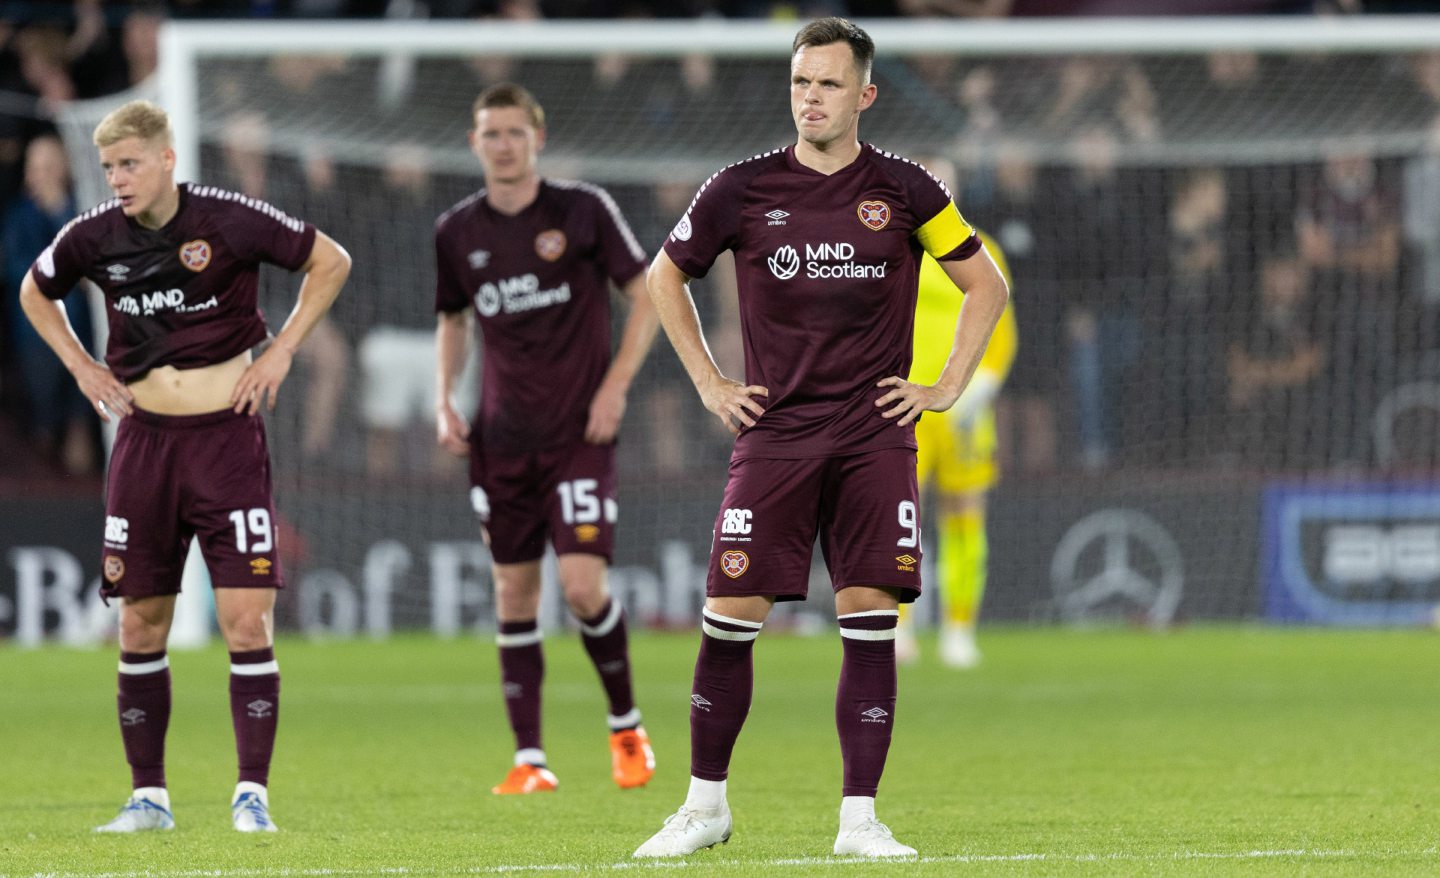 Hearts' Lawrence Shankland looking dejected on the pitch with two other players behind him